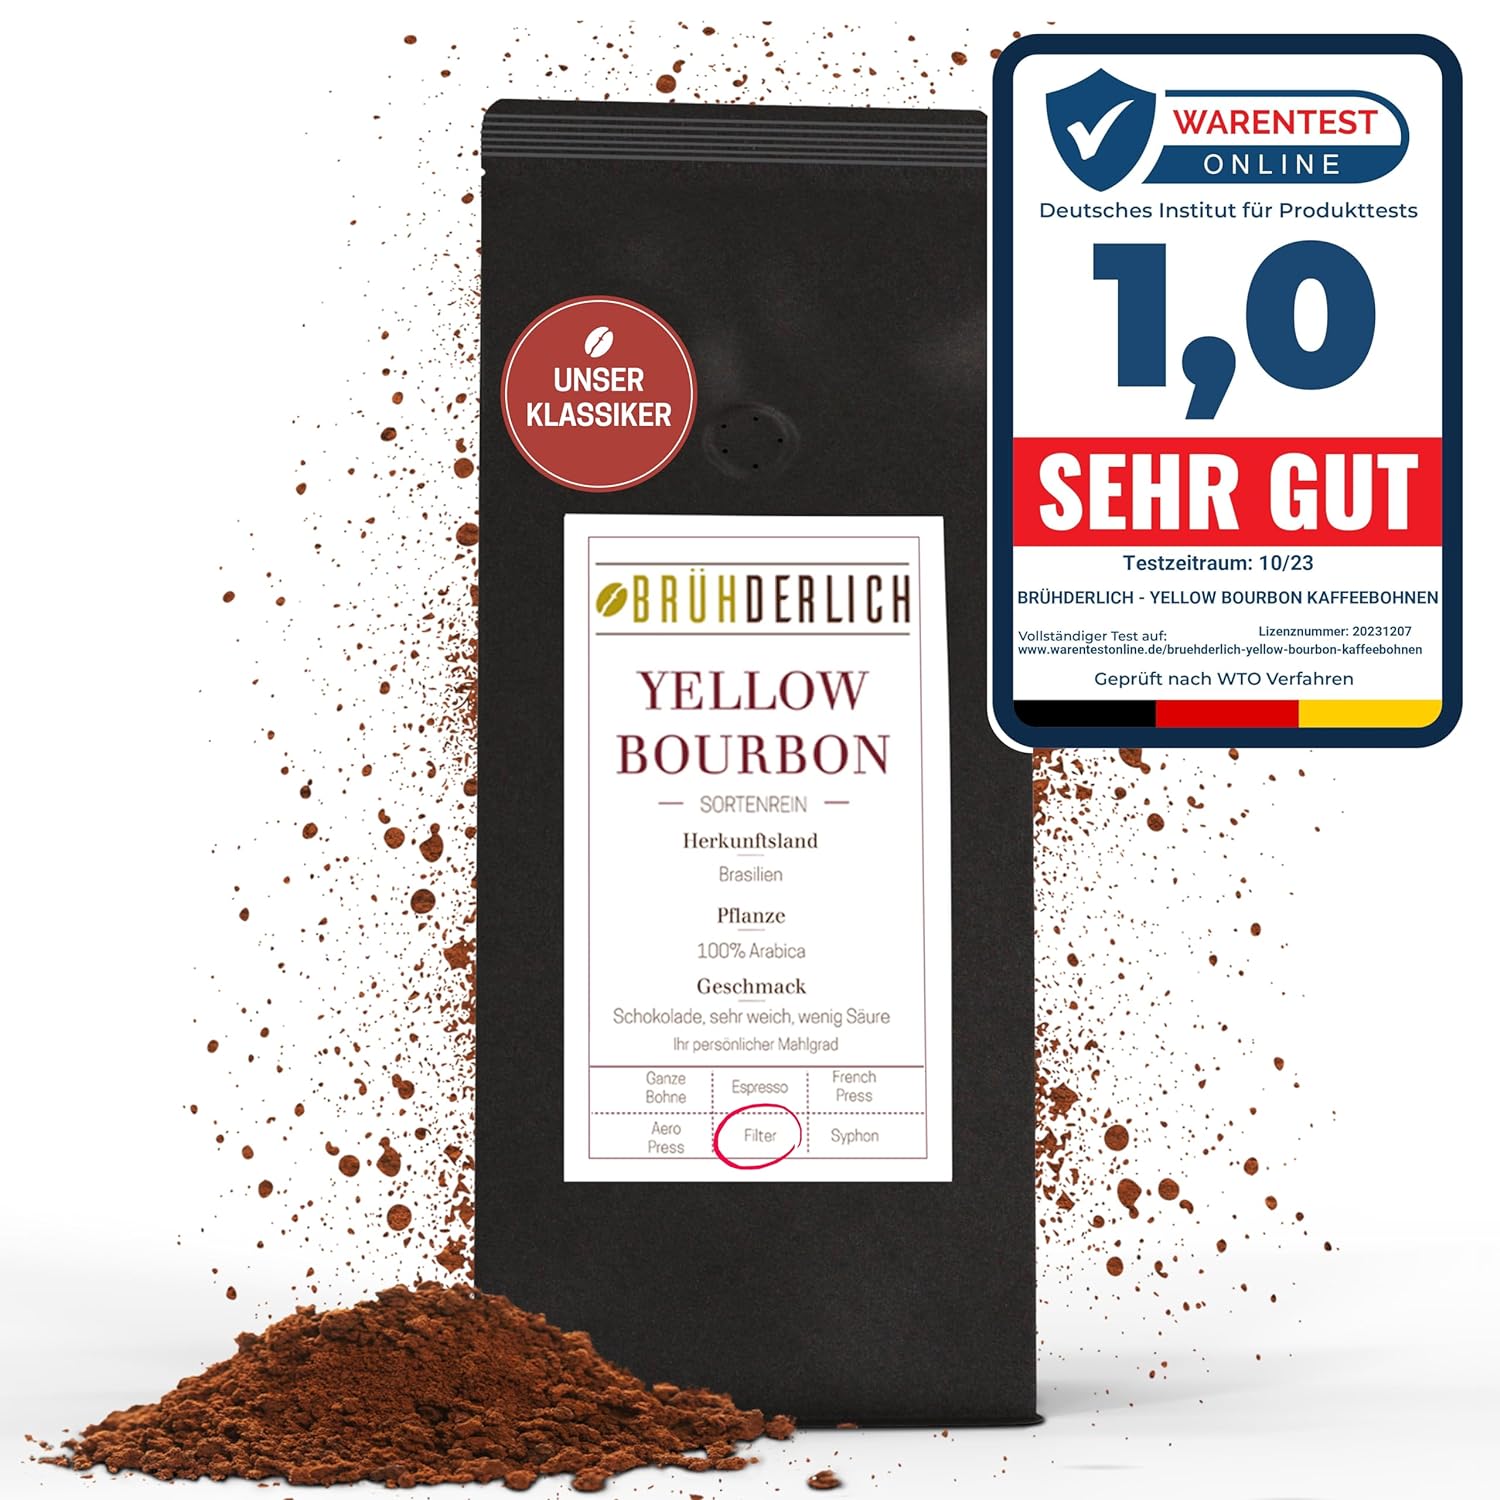 BRÜHDERLICH Yellow Bourbon Premium Ground Coffee Beans (1 kg) - Exceptionally Mild and Low Acid - Special Arabica Coffee from Brazil - Freshly Ground Directly from the Roasting Factory